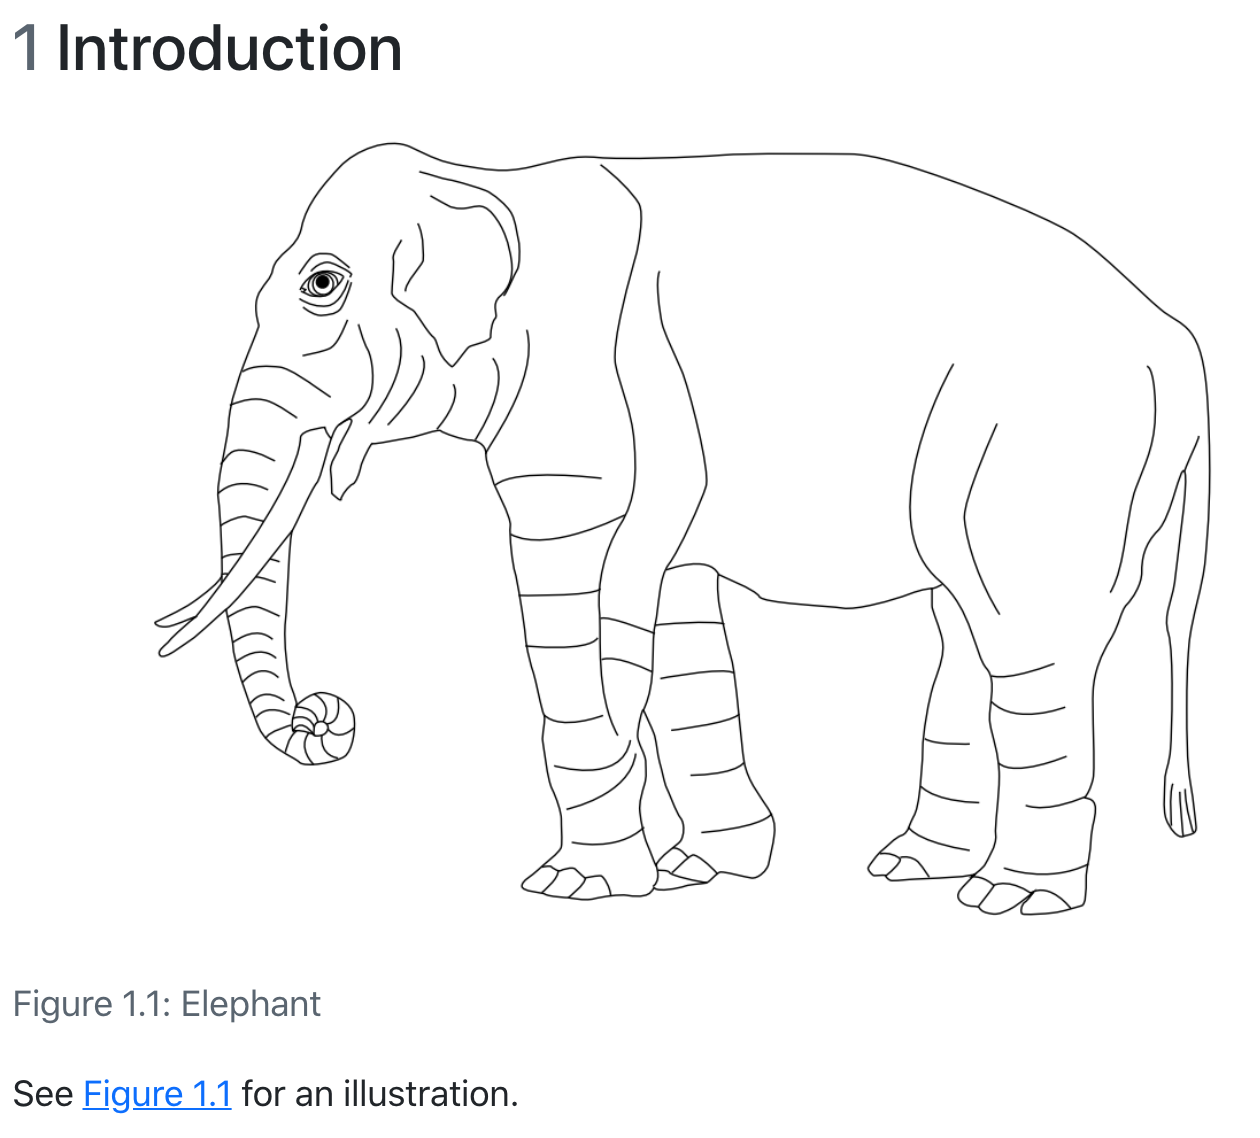 A line drawing of an elephant. Above it is the text '1 Introduction' in large, bold font. The label 'Figure 1.1: Elephant' is centered underneath it. The text 'See fig. 1.1 for an illustration' is aligned to the left underneath that.